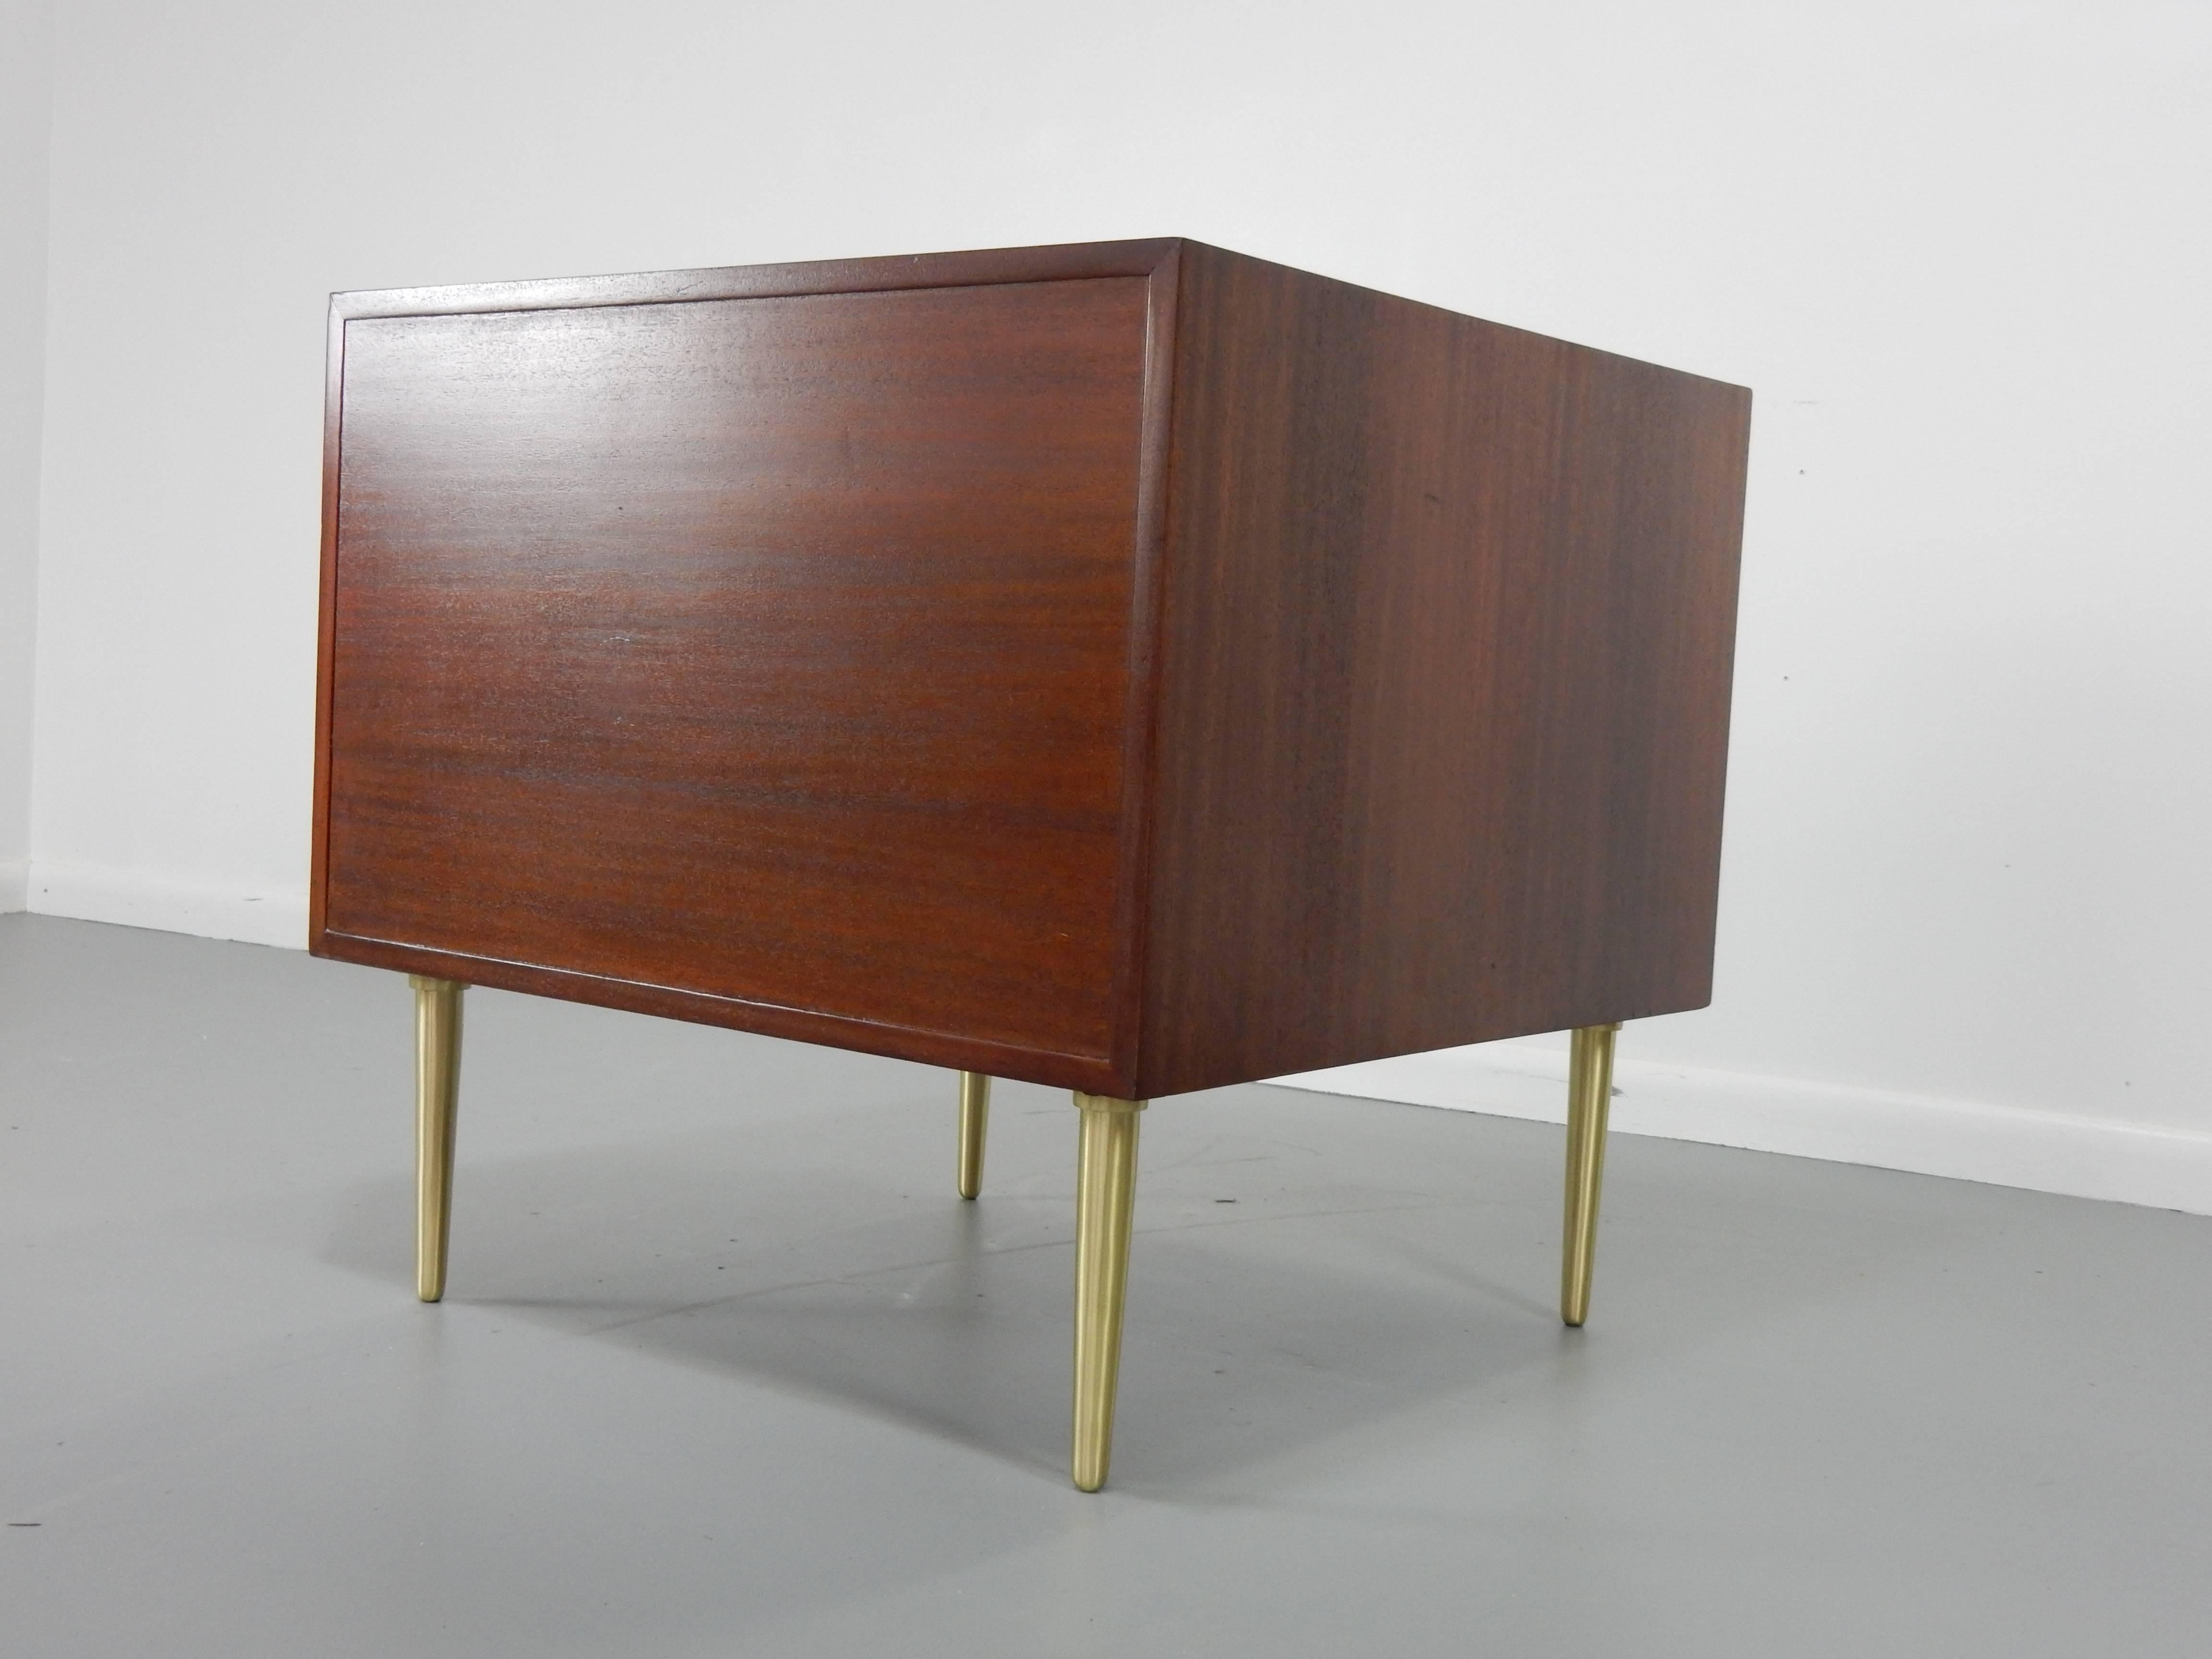 Spun Edward Wormley for Dunbar Five-Drawer Commode, Mahogany and Brass Mid Century